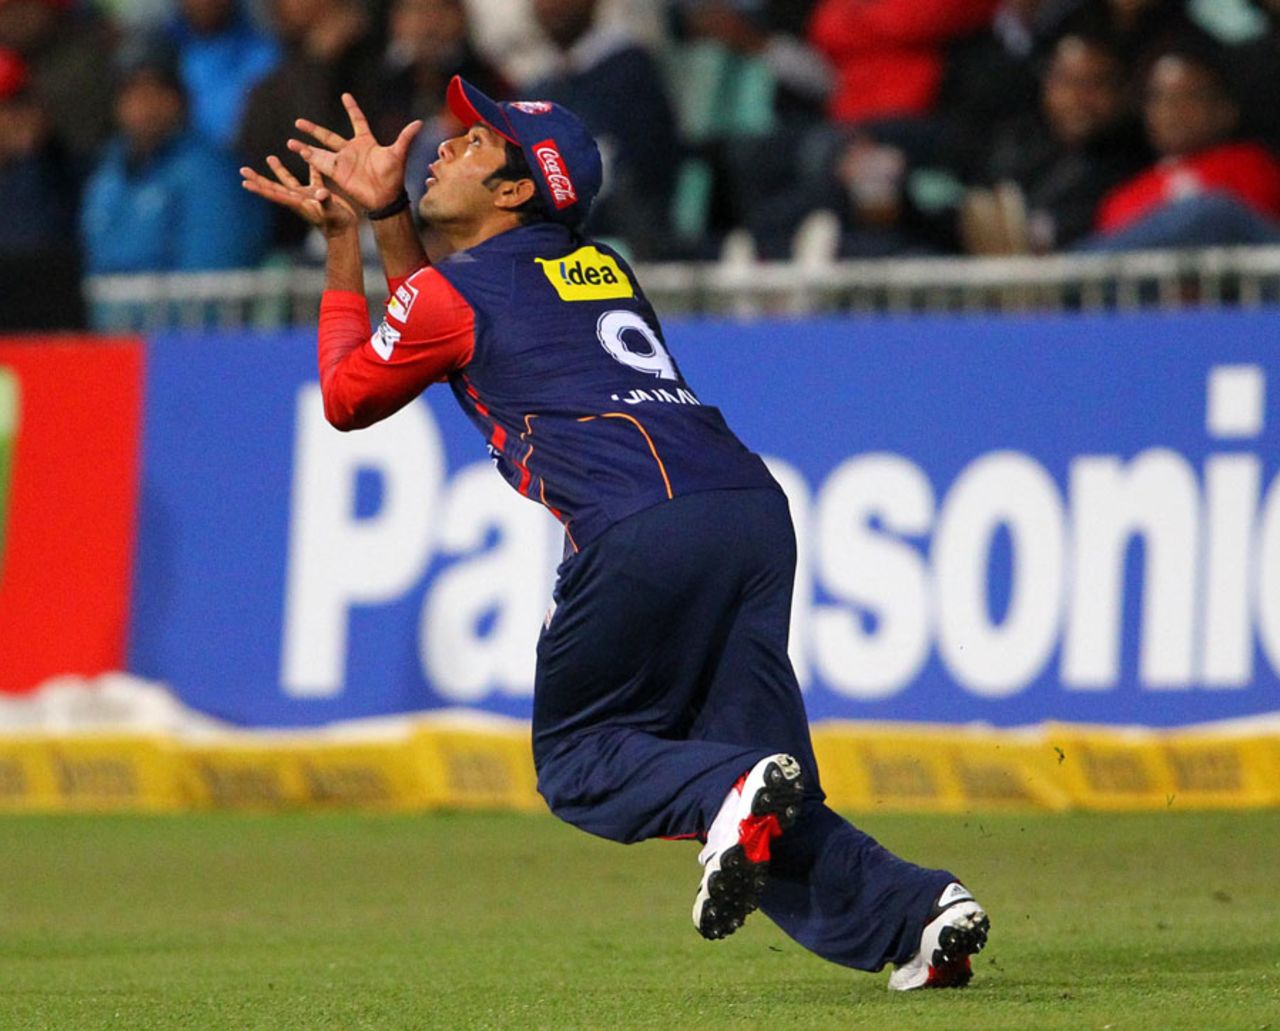 Unmukt Chand attempts to take a catch, Delhi Daredevils v Lions, 1st semi-final, Champions League T20, Durban, October 25, 2012